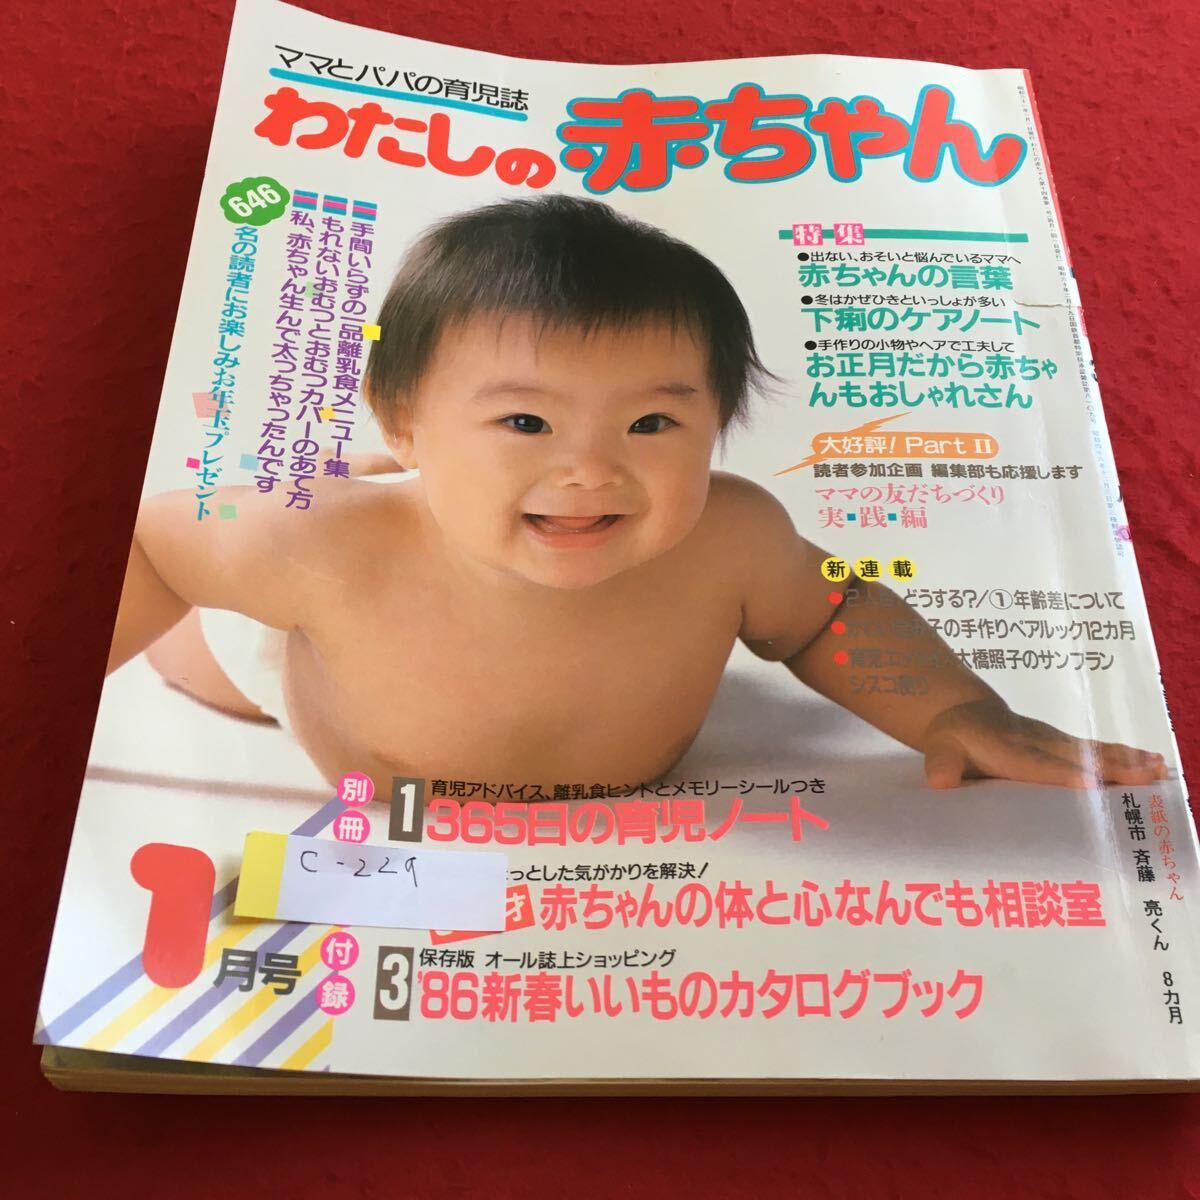 c-229 mama . papa. childcare magazine cotton plant .. baby special collection doesn't go out,........ mama . baby. word *4